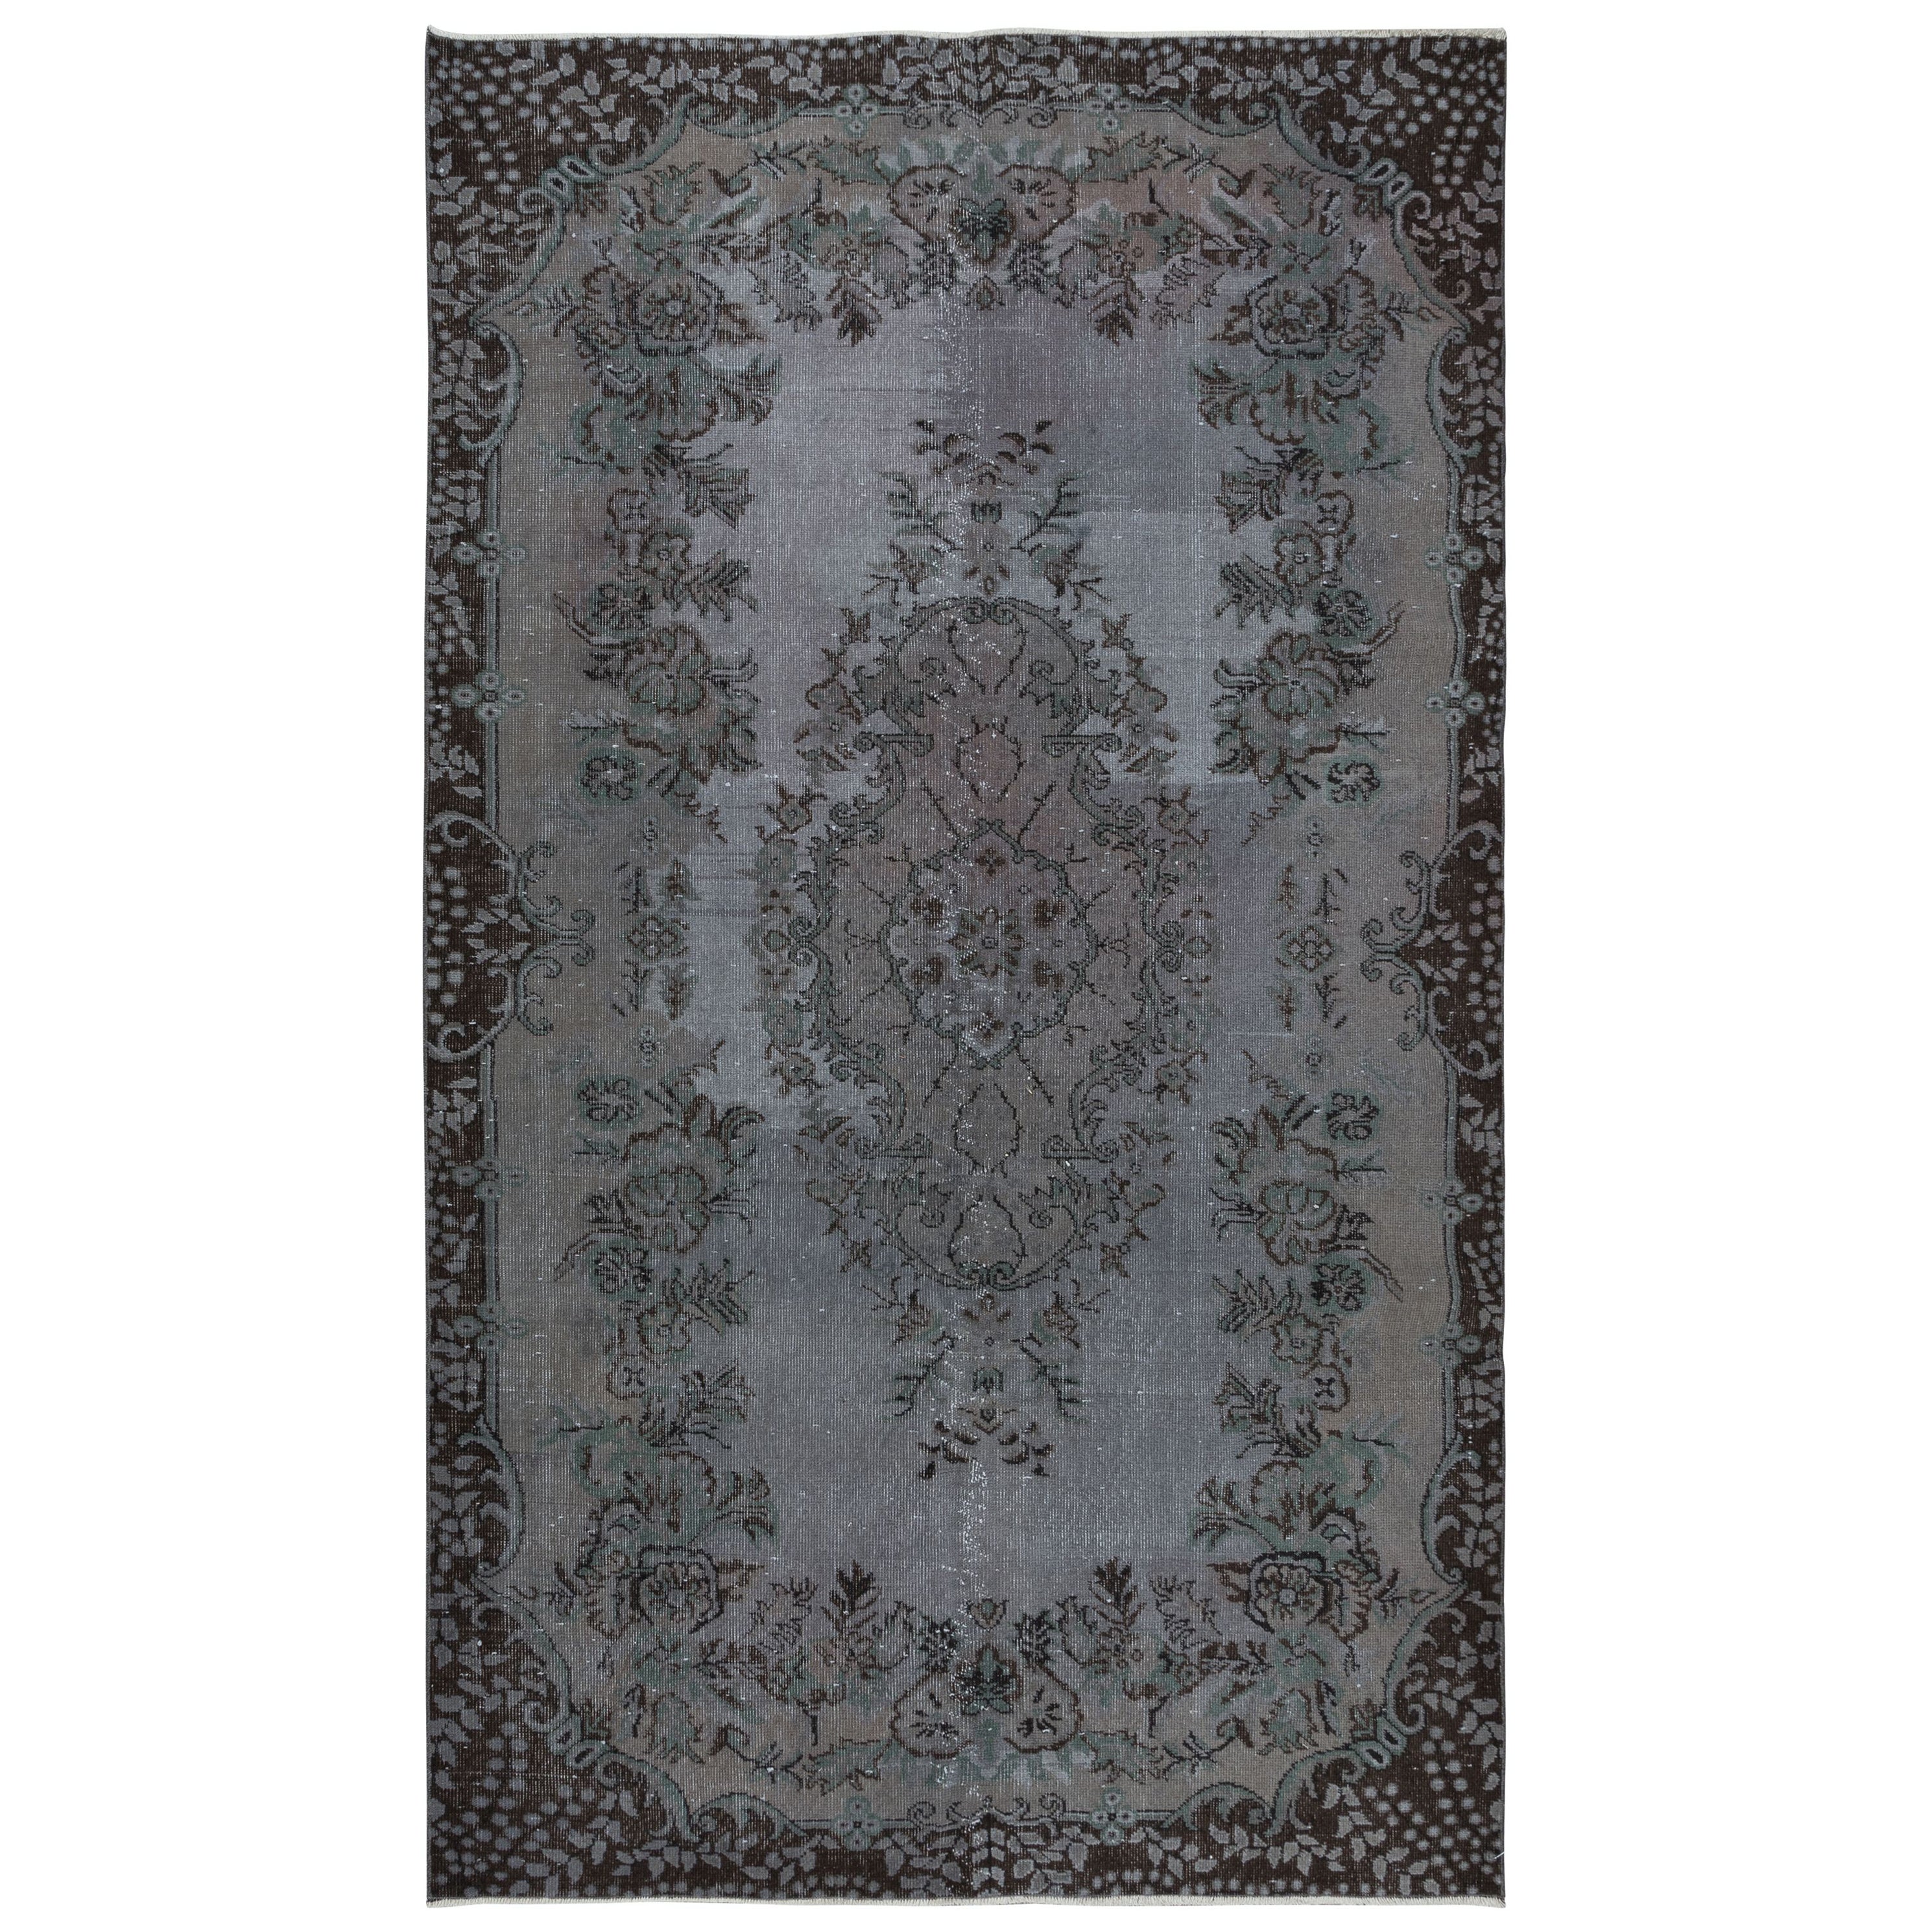 5.6x9 Ft Hand Knotted Rug with Floral Medallion, Gray Modern Turkish Carpet